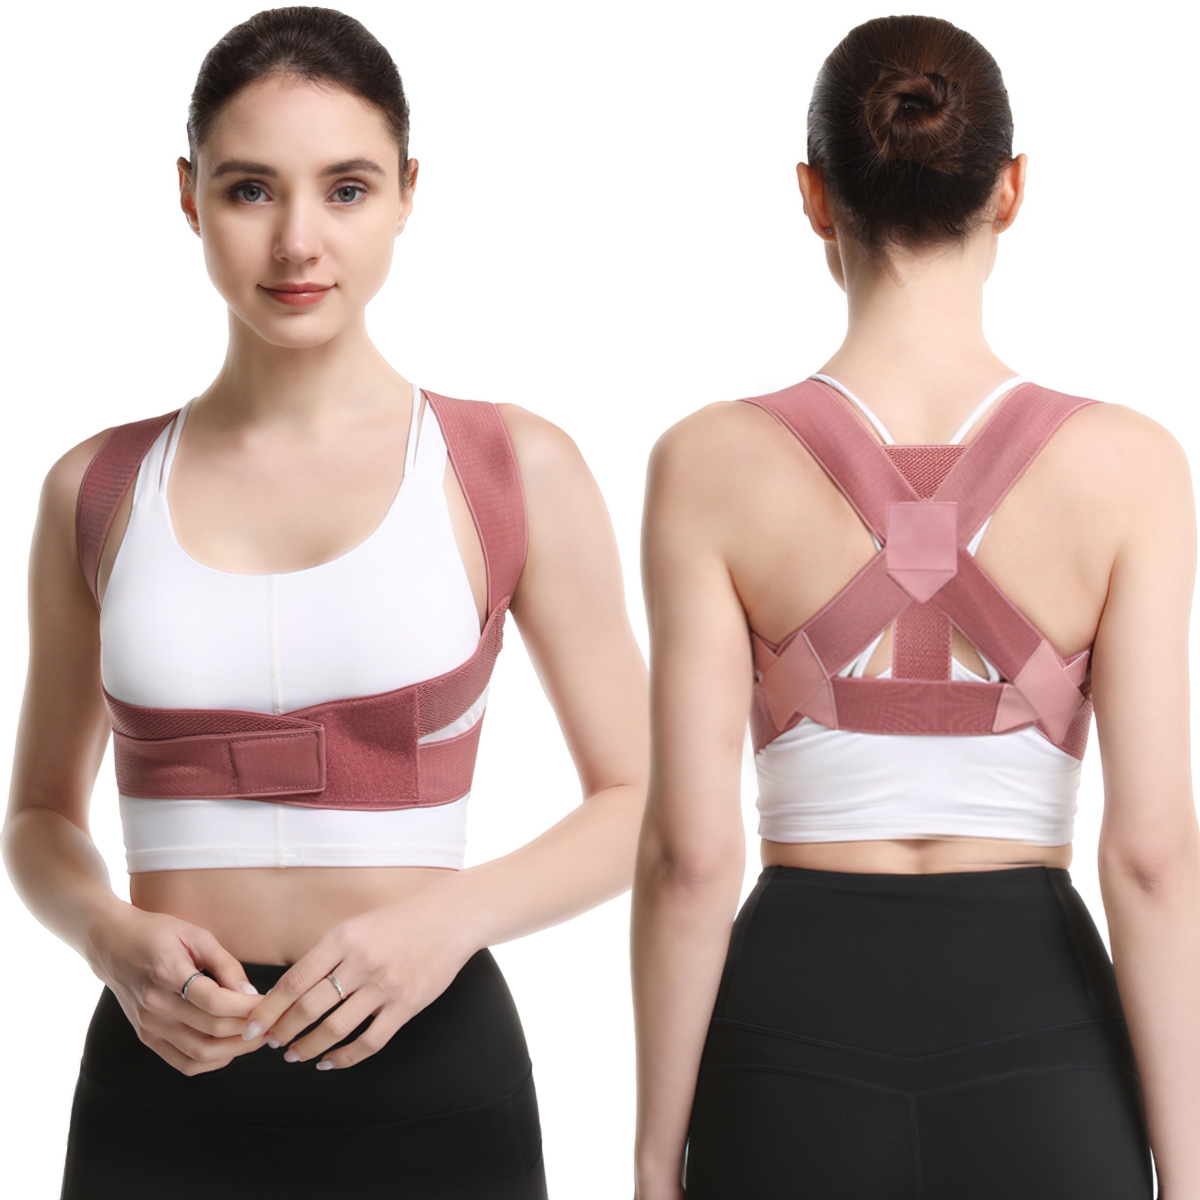 Anti-Humpback Belt Supports the Breast to Shape the Body